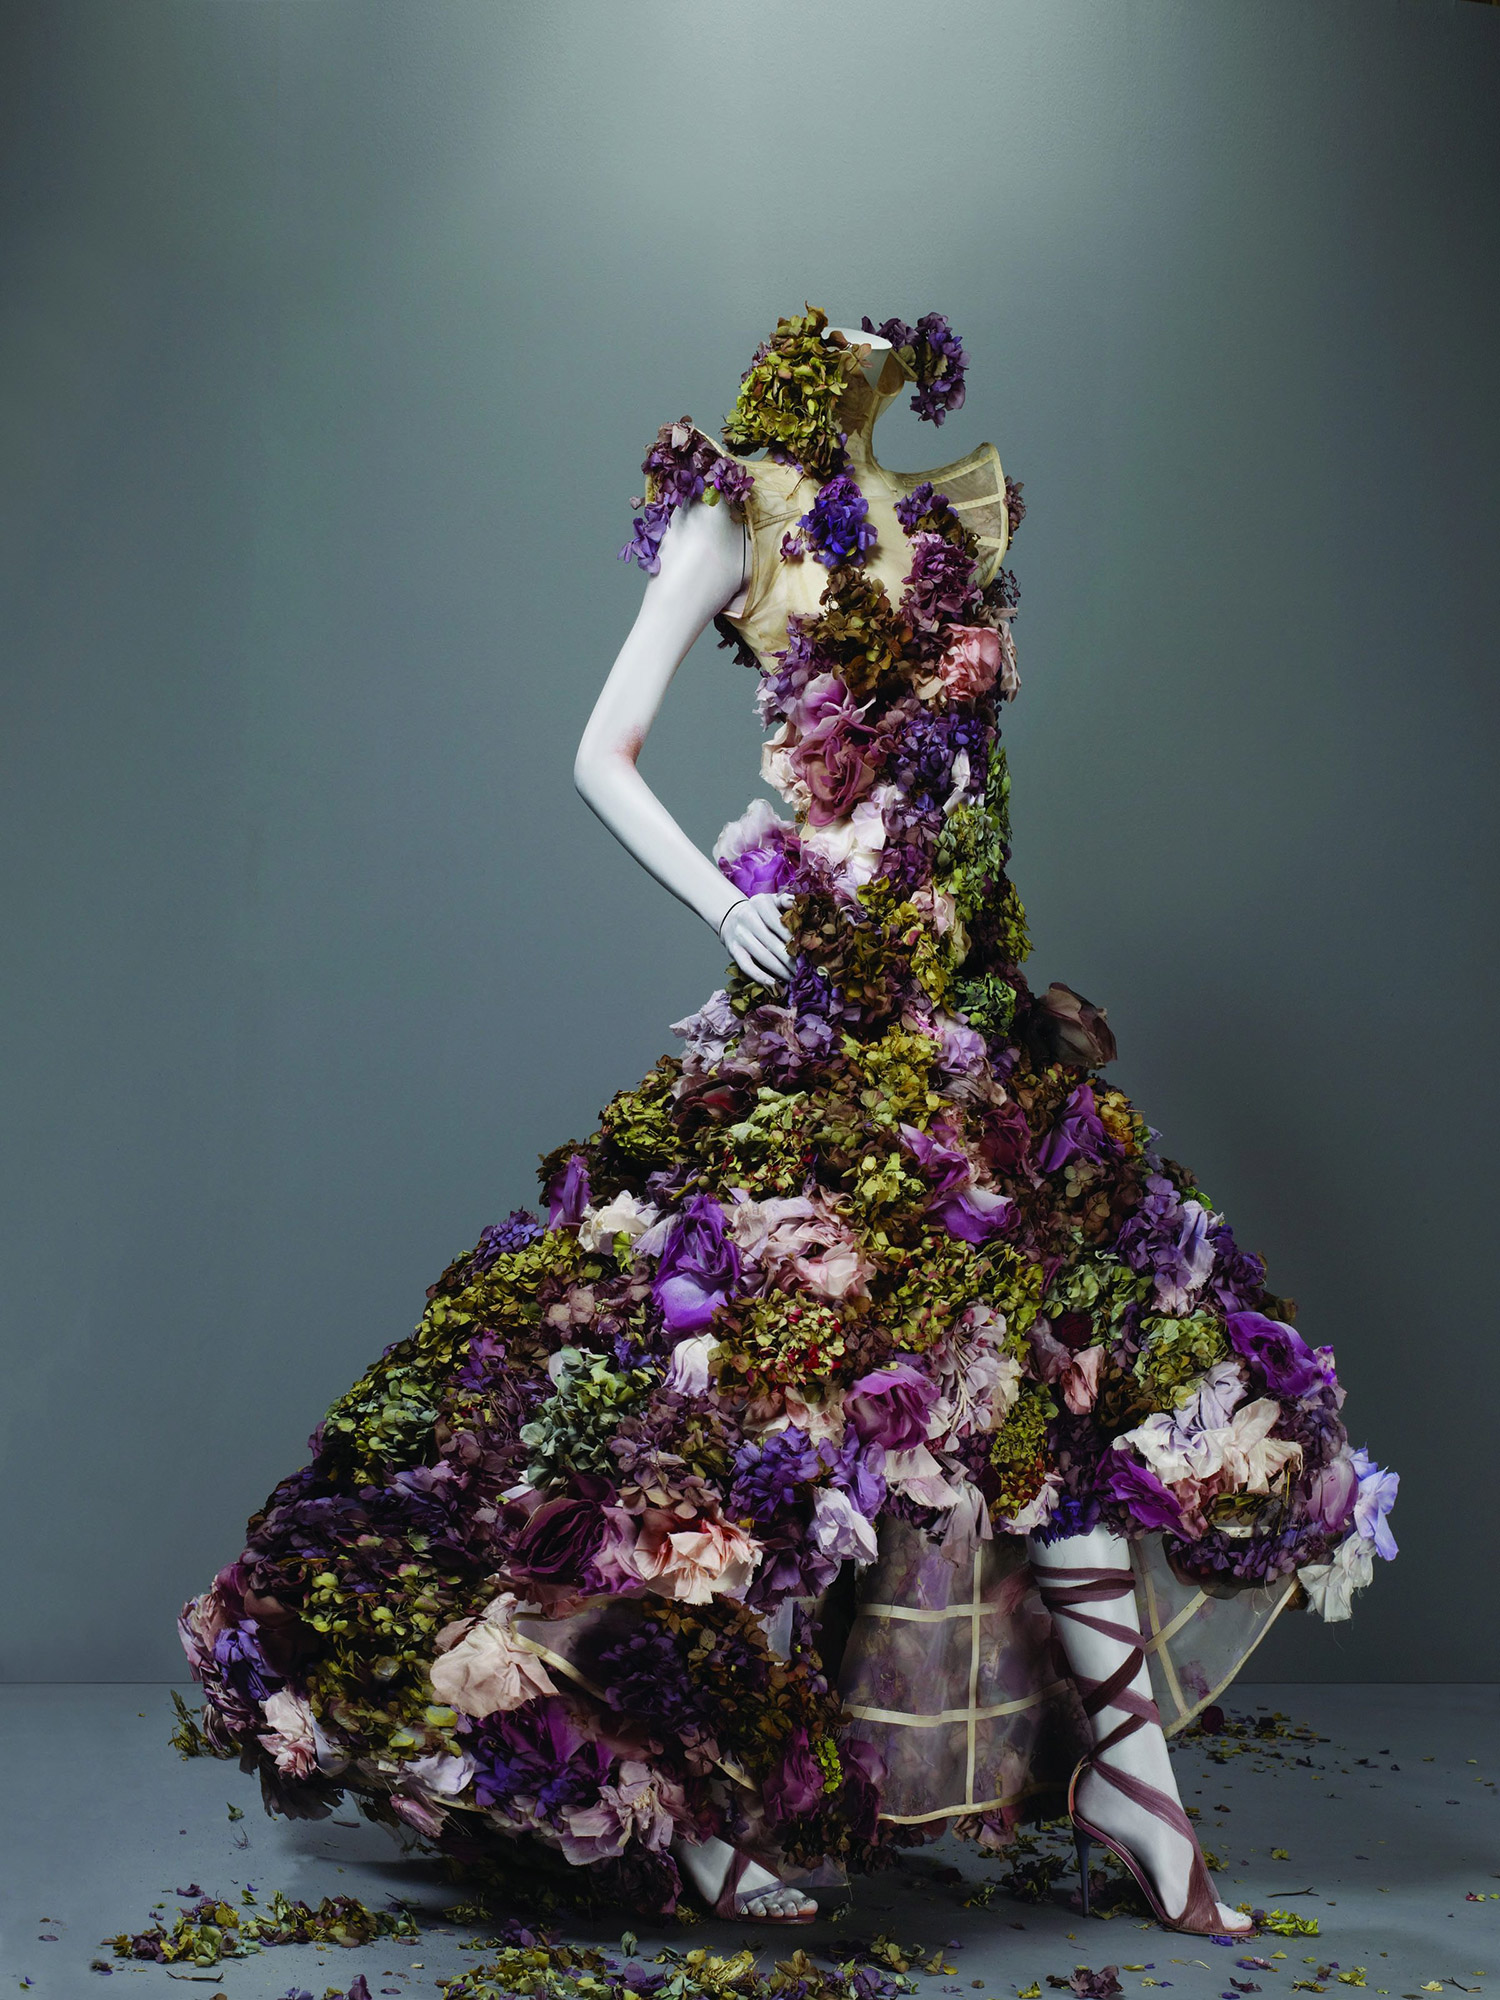 The Most Ephemeral Flowers” Inspired Alexander McQueen's Sarah